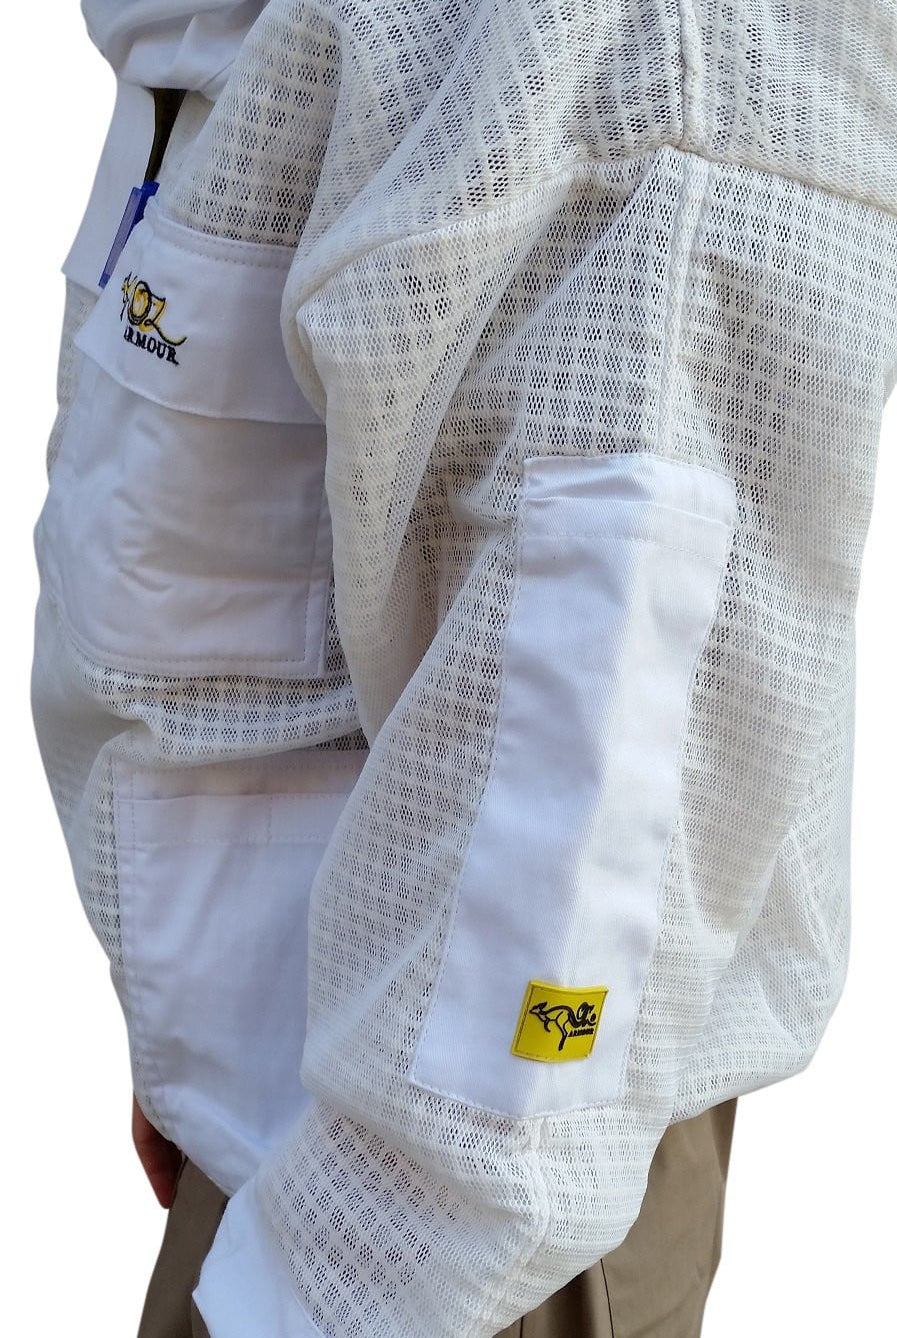 OZ ARMOUR 3 Layer Mesh Ventilated Beekeeping Jacket With Fencing Veil,Beekeeping,beekeeping gear,oz armour